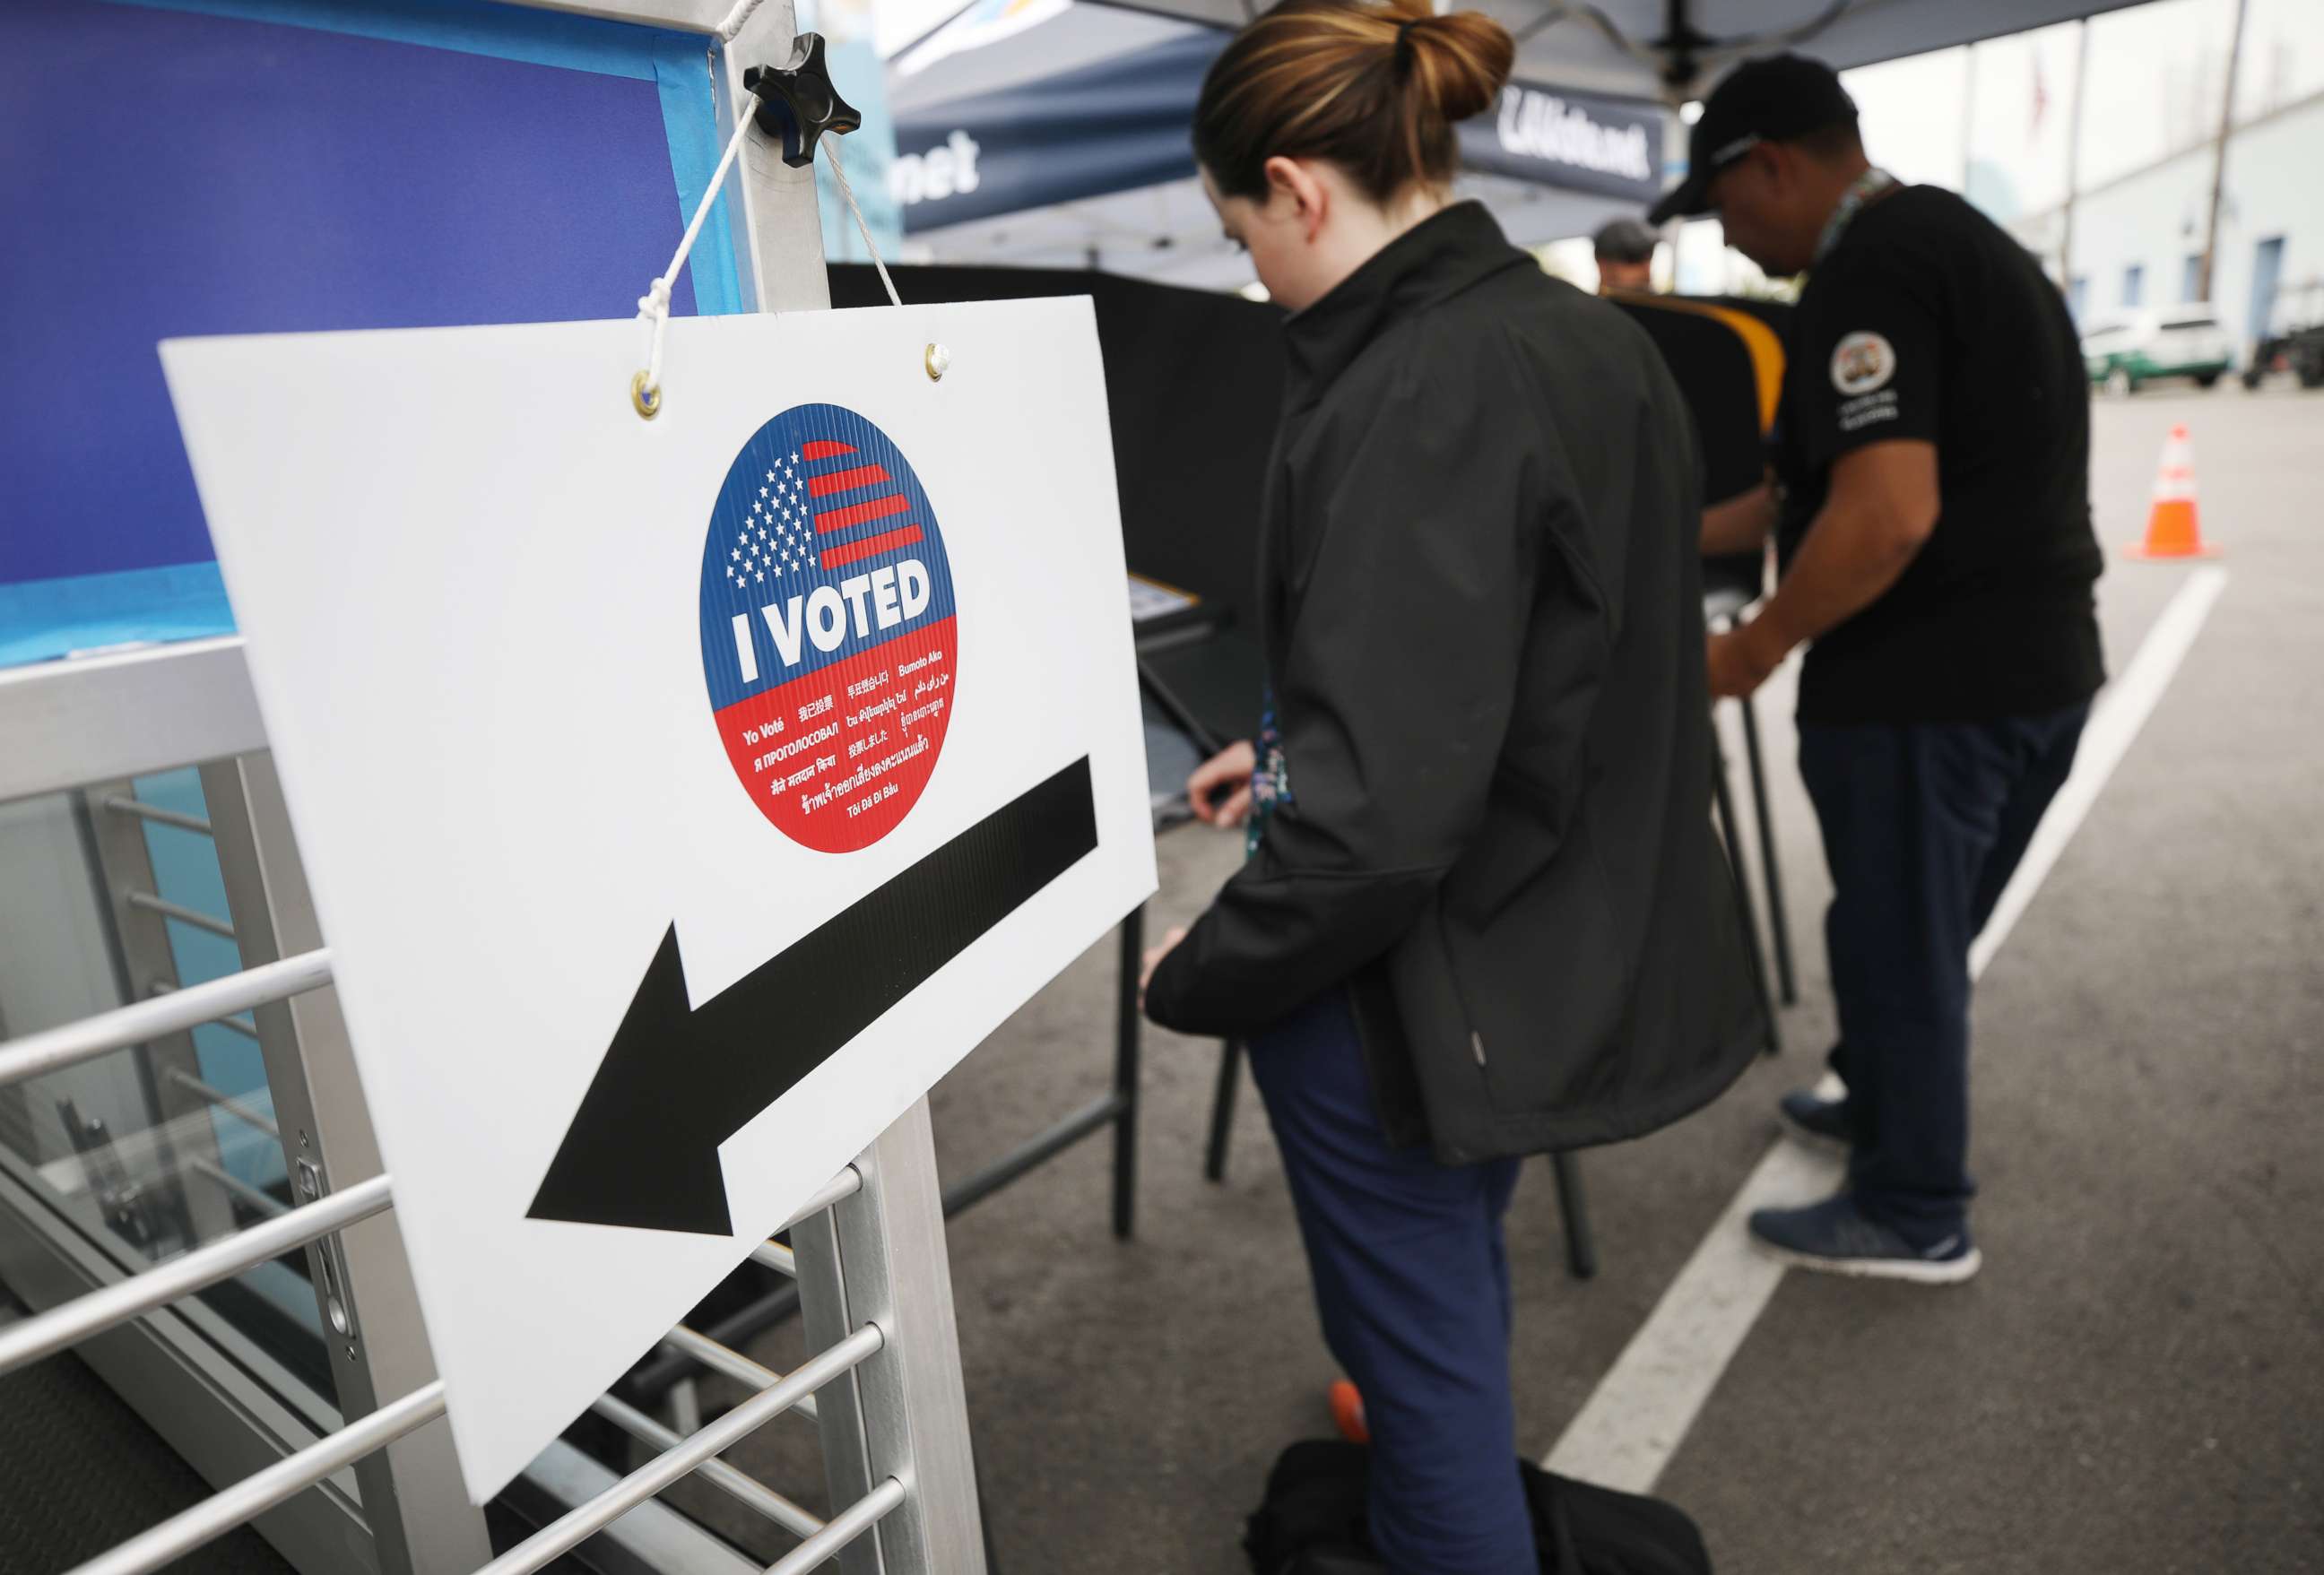 PHOTO: Voters prepare their ballots in voting booths during early voting for the California presidential primary election on Feb. 27, 2020, in Universal City, Calif.